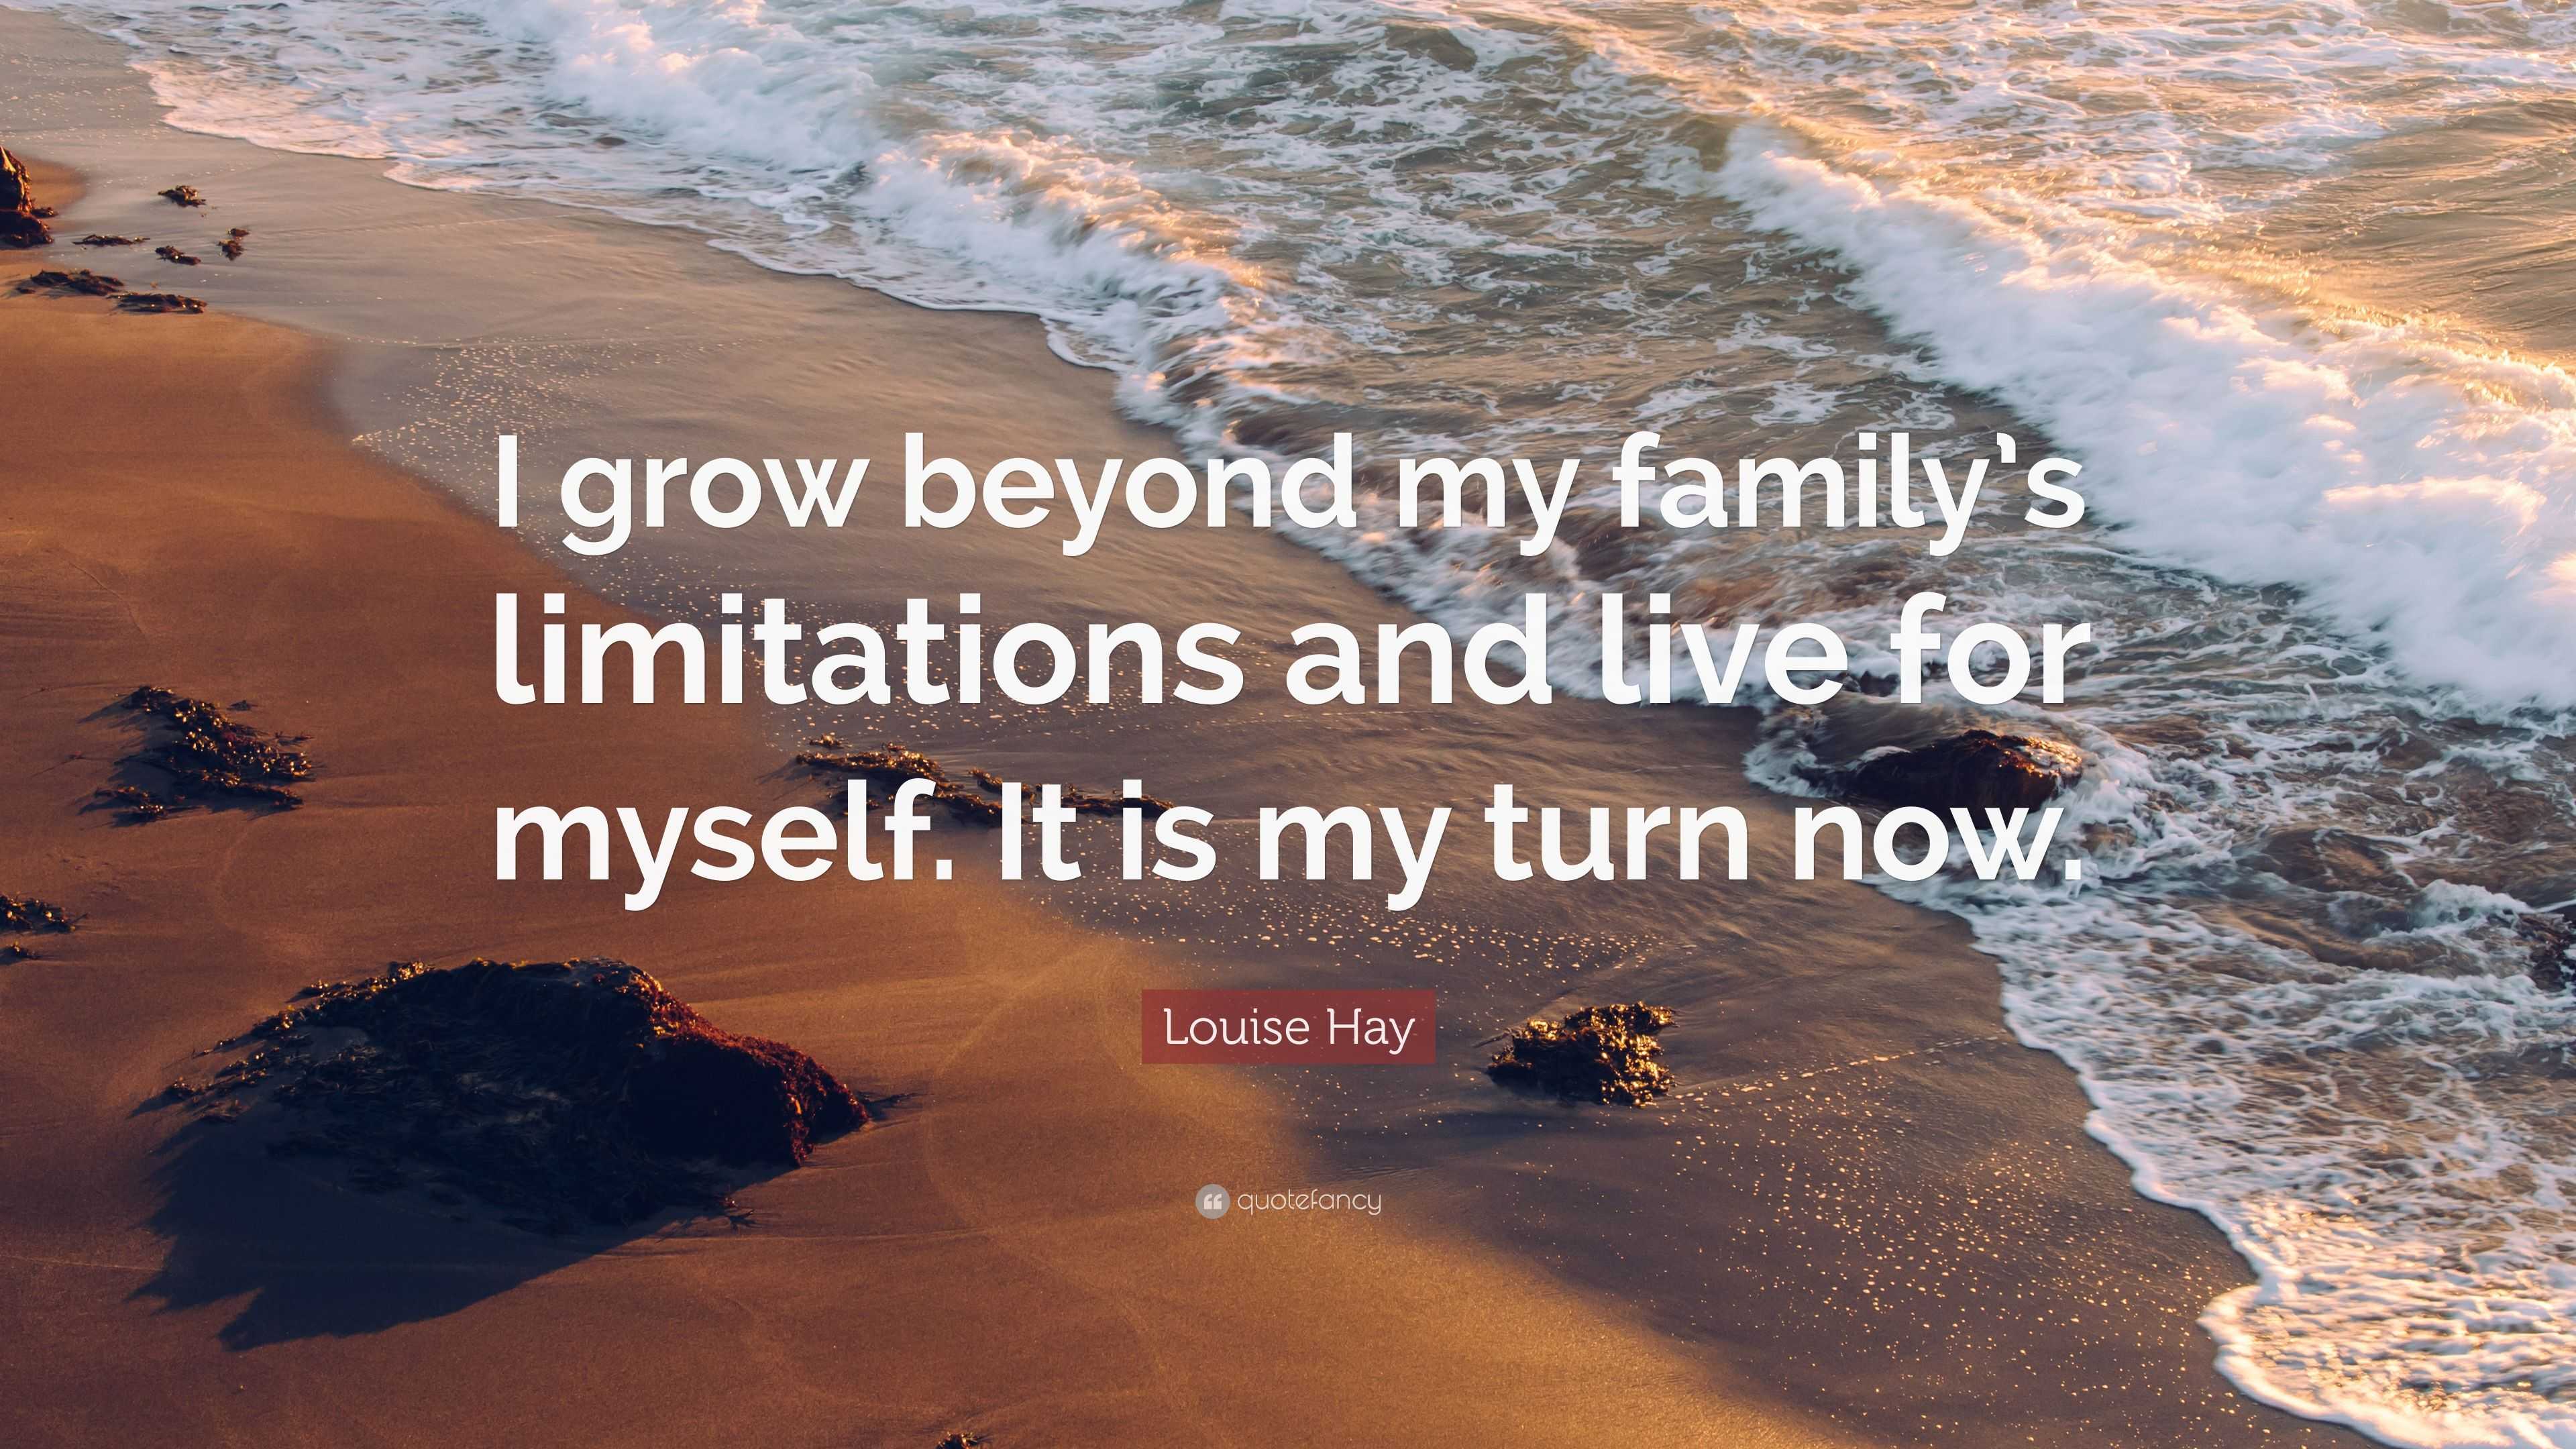 Louise Hay Quote: “I grow beyond my family’s limitations and live for ...